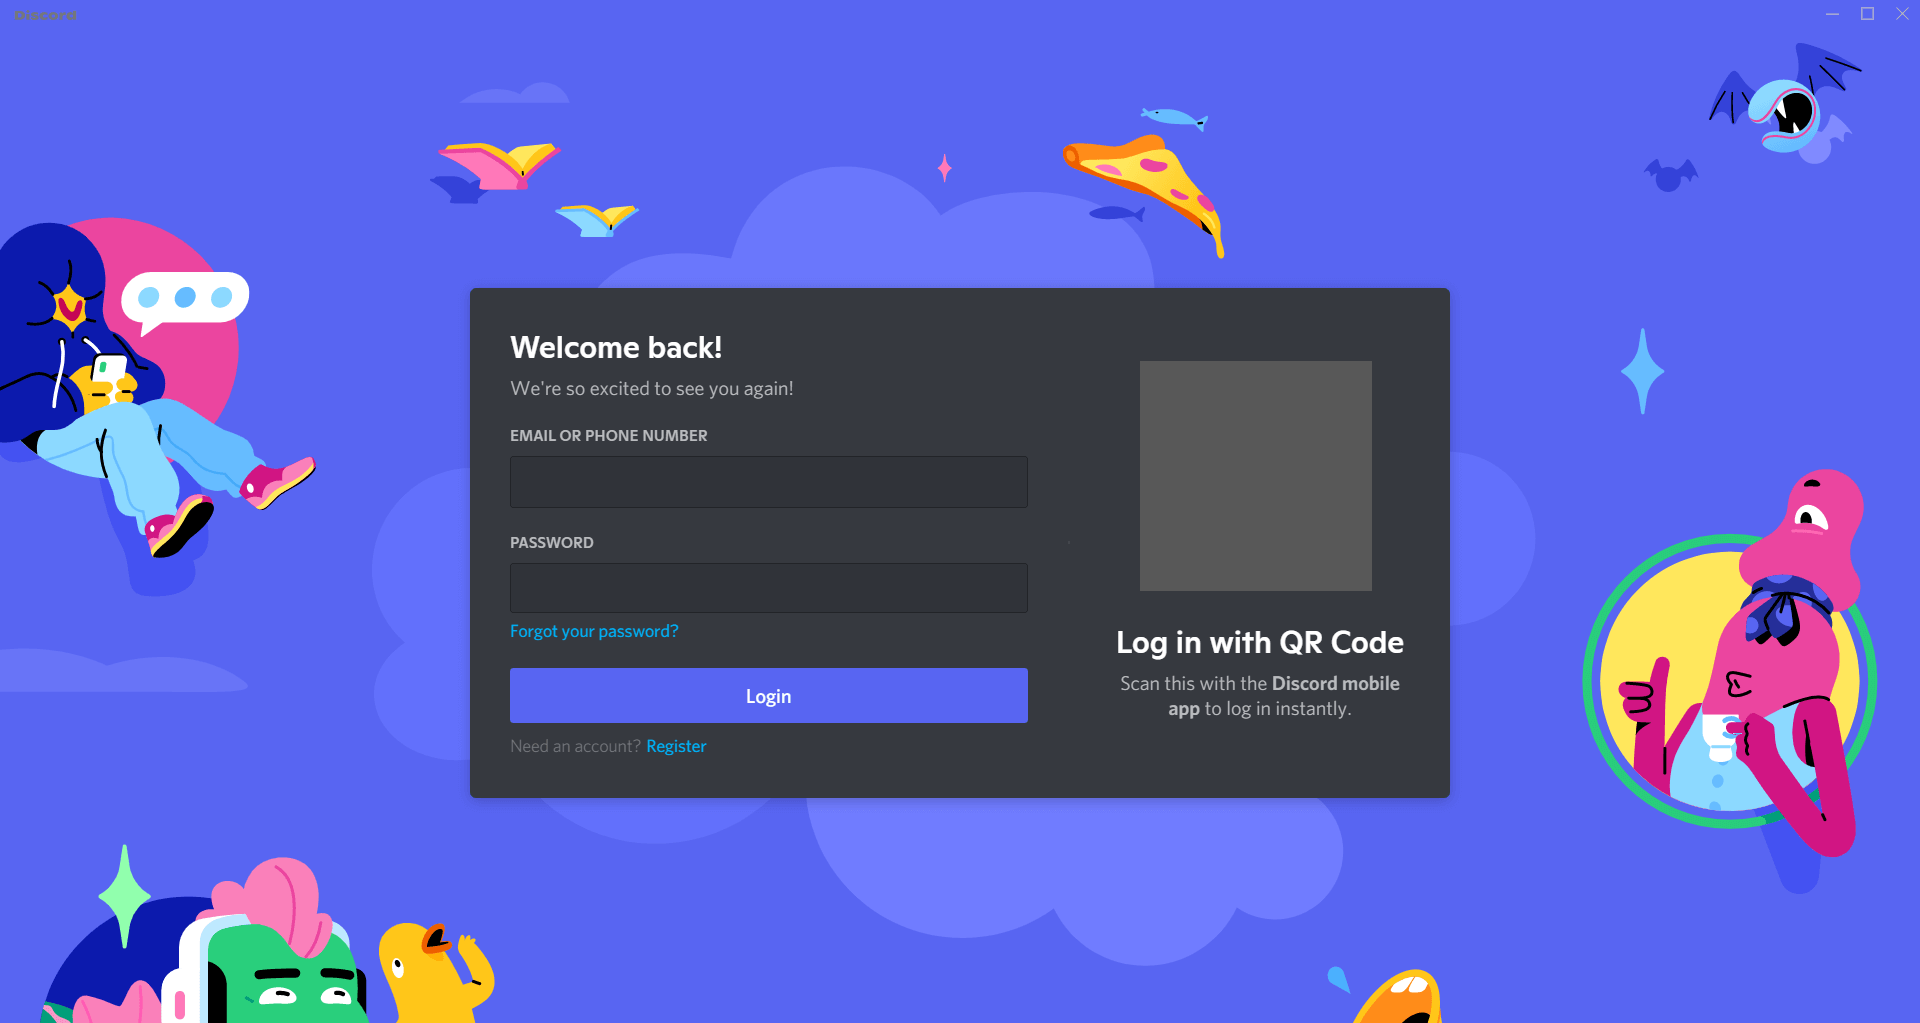 Start Discord and log into your account